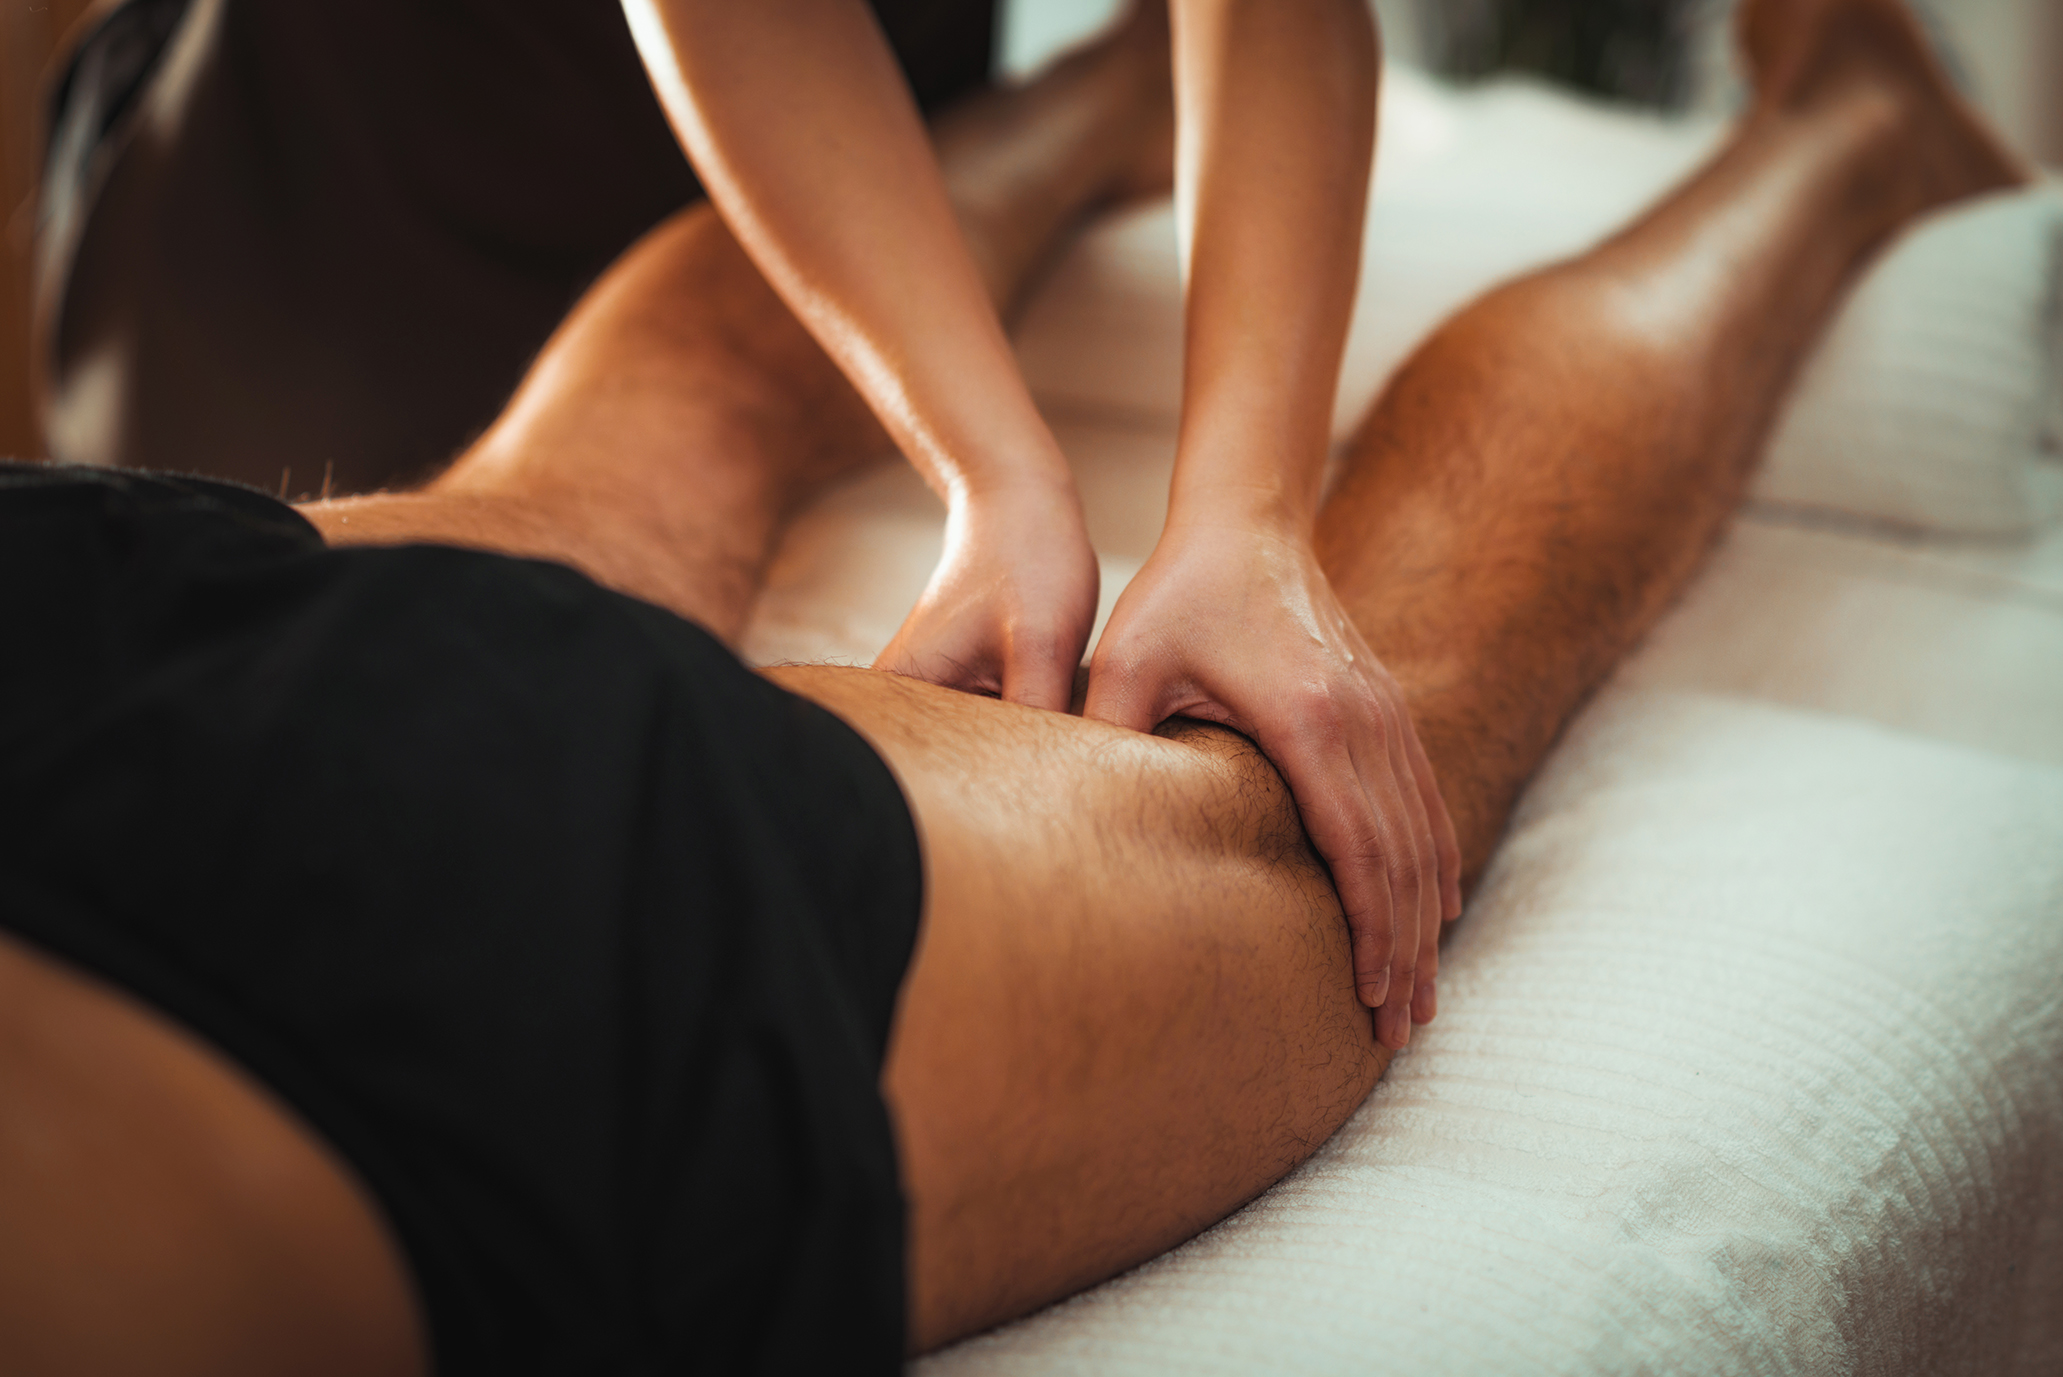 RPM Bodywork specializes in treating sports injury and chronic pain.